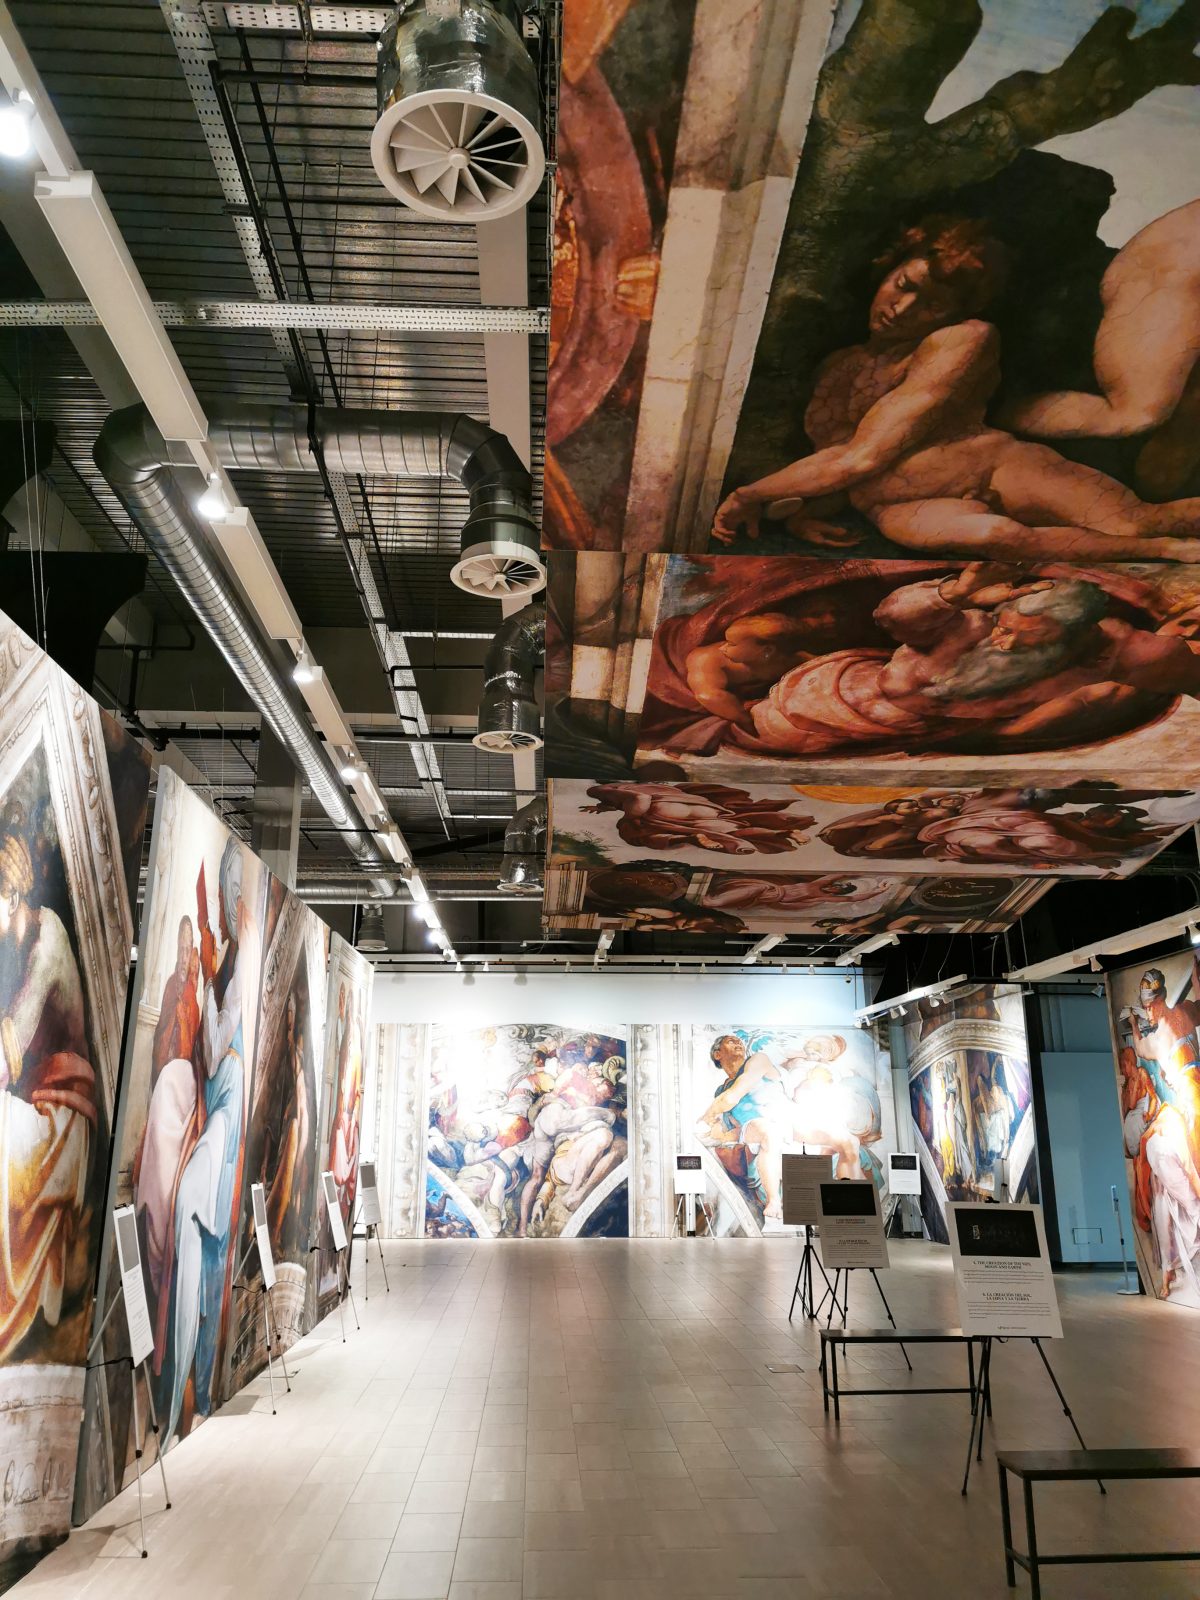 The ceiling of the Sistine Chapel has been recreated in a new art experience in Greater Manchester, The Manc